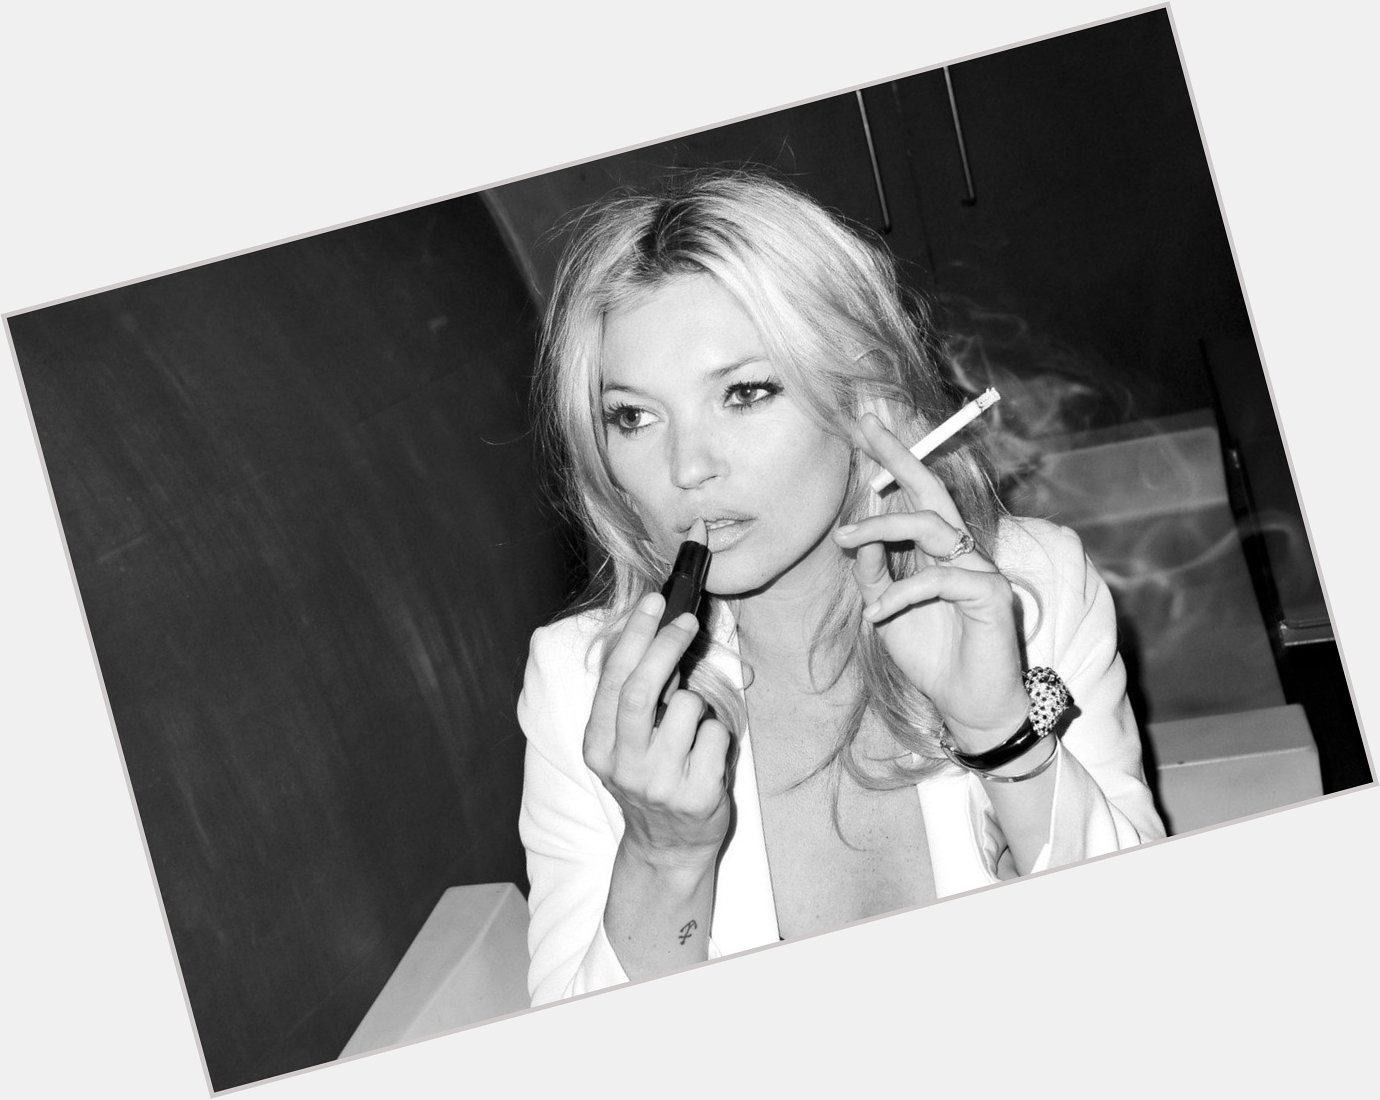 \"I haven t partied since last Friday.\"
Happy belated birthday to our favorite bad girl, Kate Moss! 